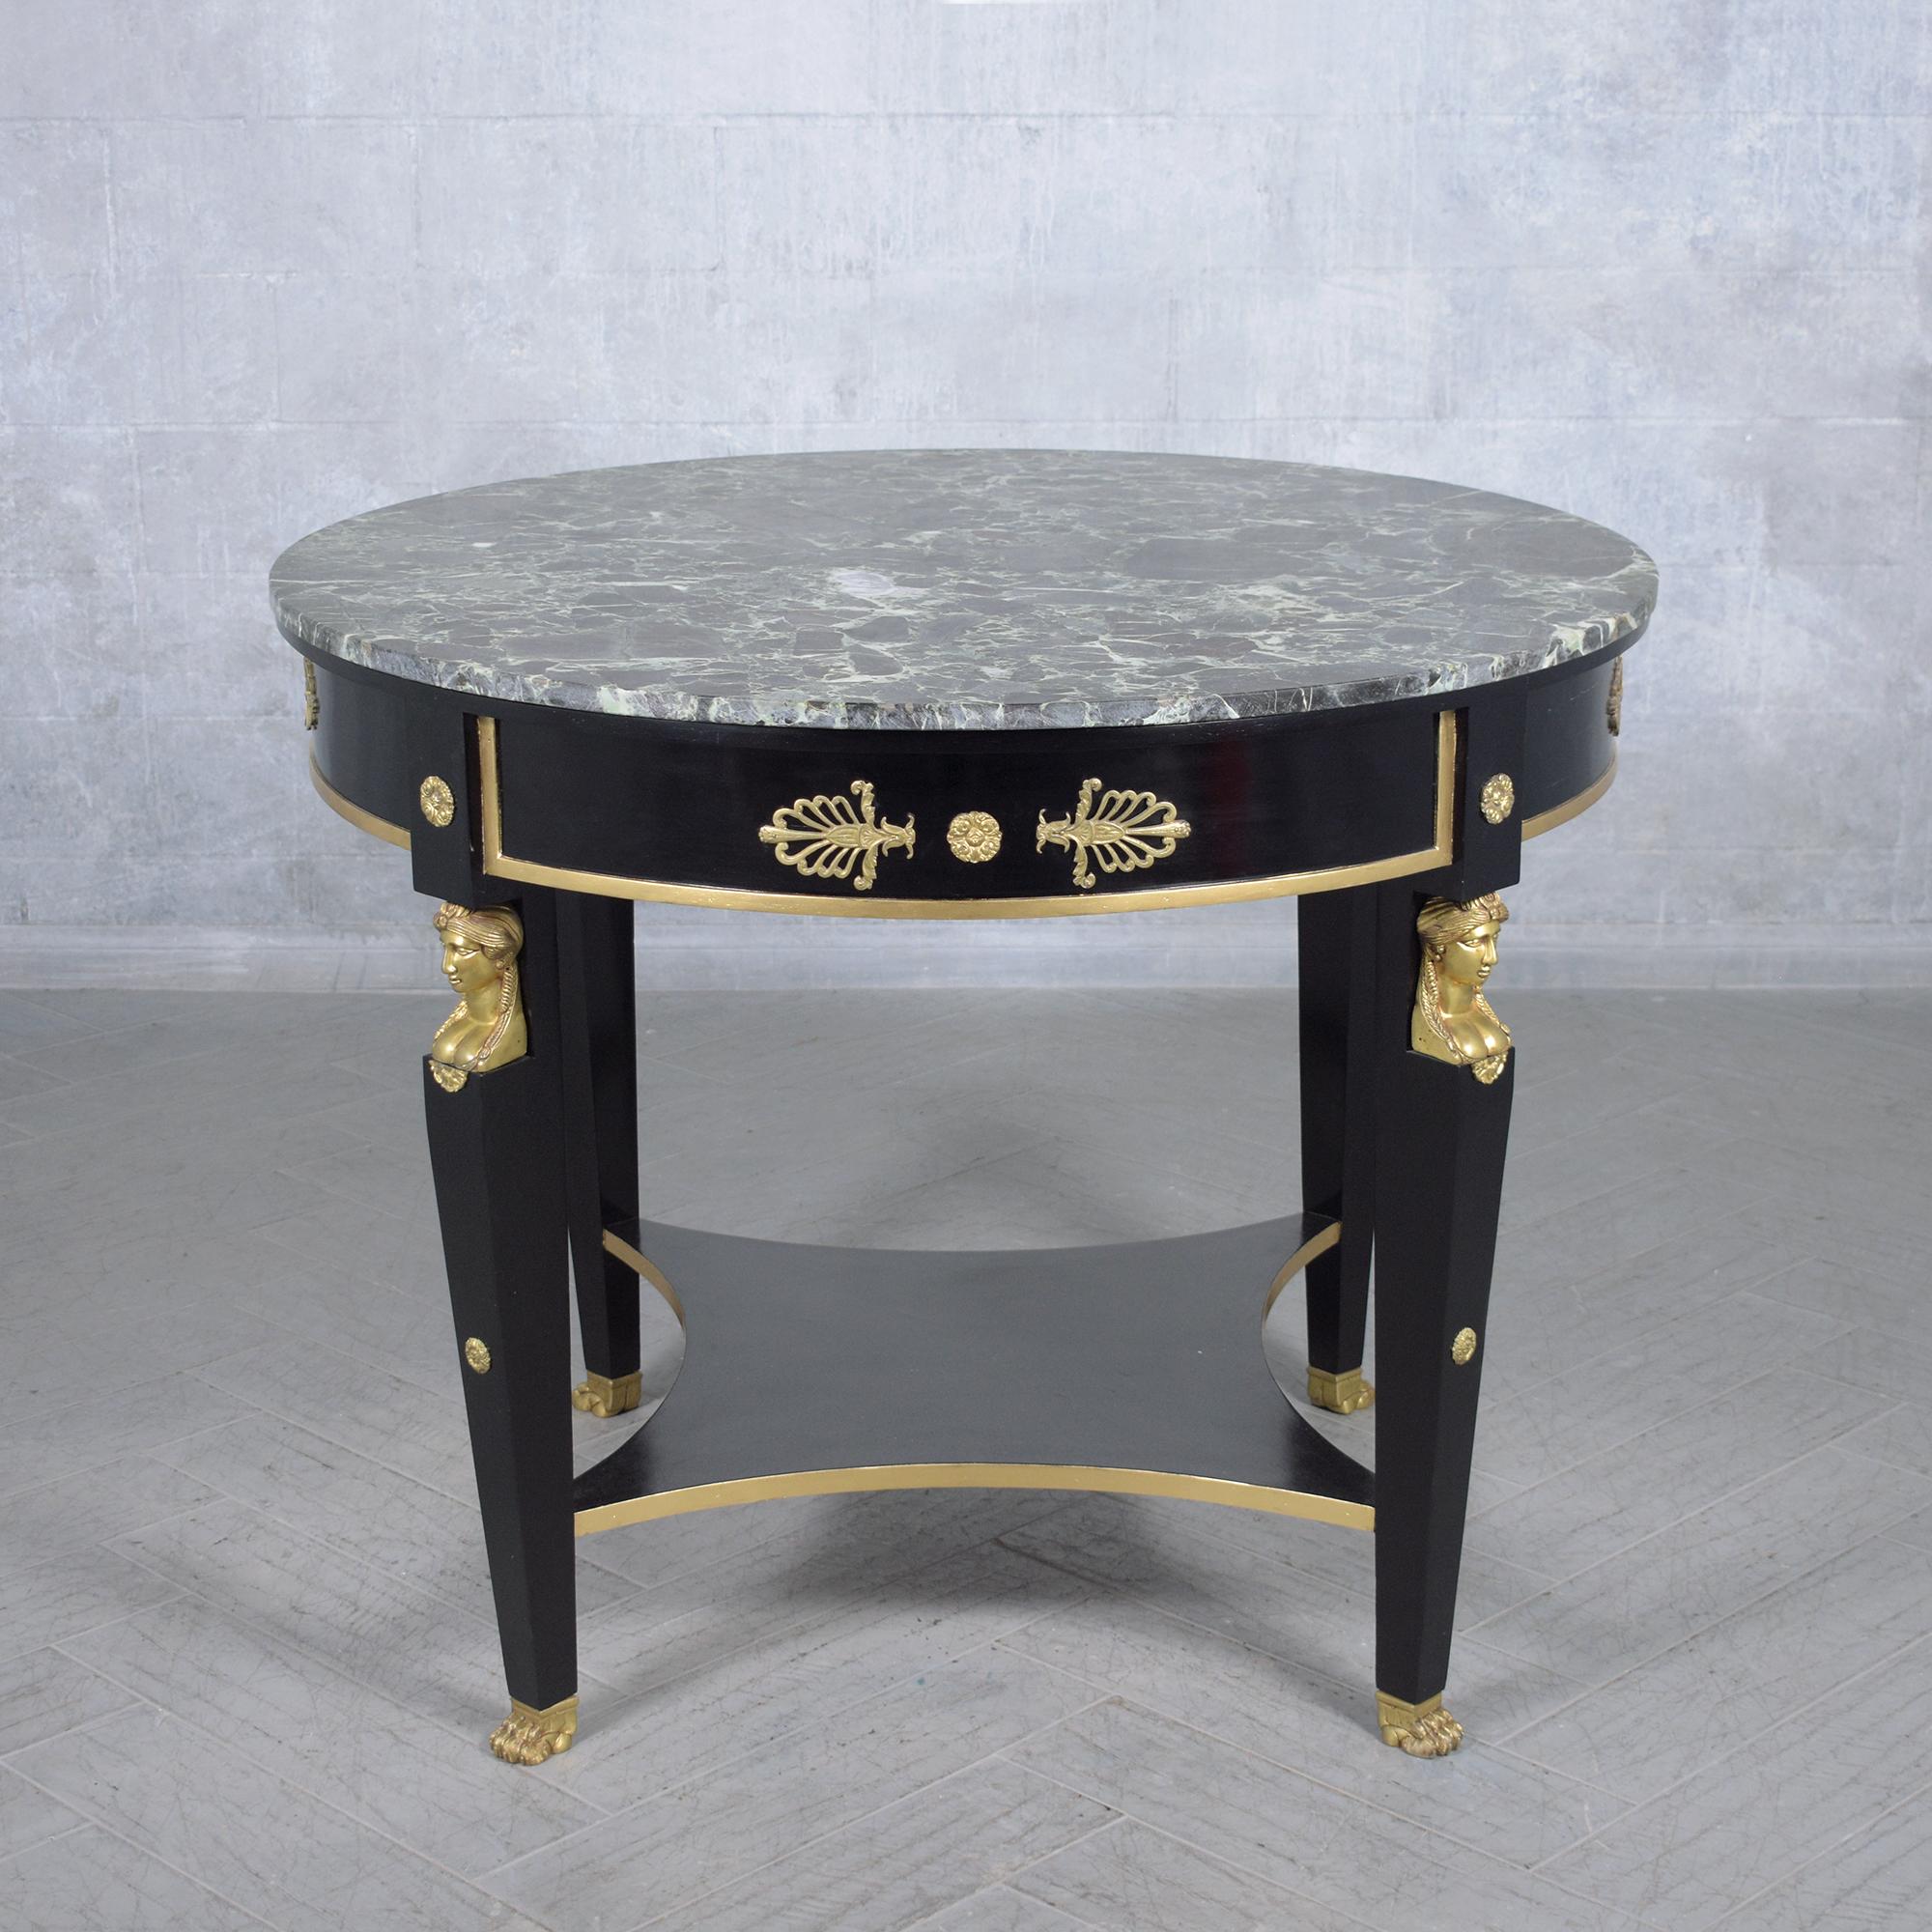 Immerse yourself in the elegance of our French Empire-style round center table, a masterpiece of design and craftsmanship brought to life by our expert team. Crafted from premium mahogany wood, this antique table shines with a deep black, glossy